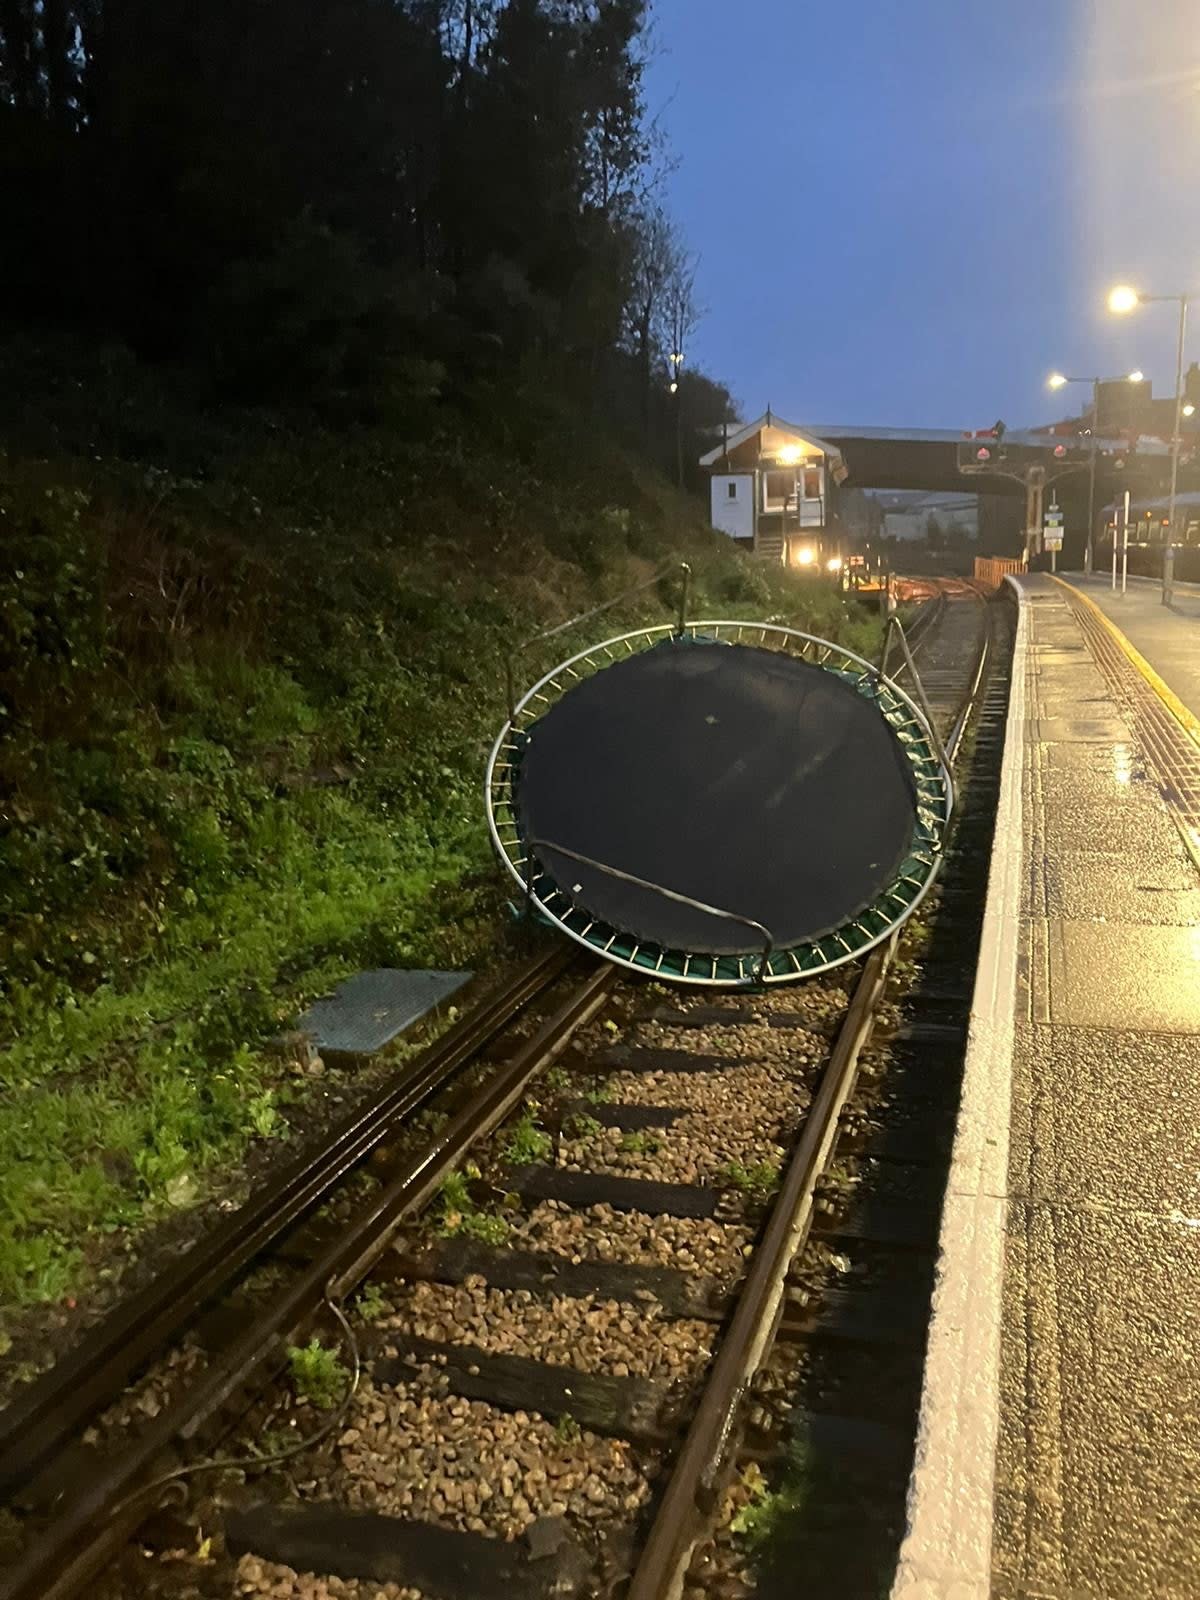 A trampoline blown onto tracks during Storm Ciaran at Hastings (Southeastern / Twitter)